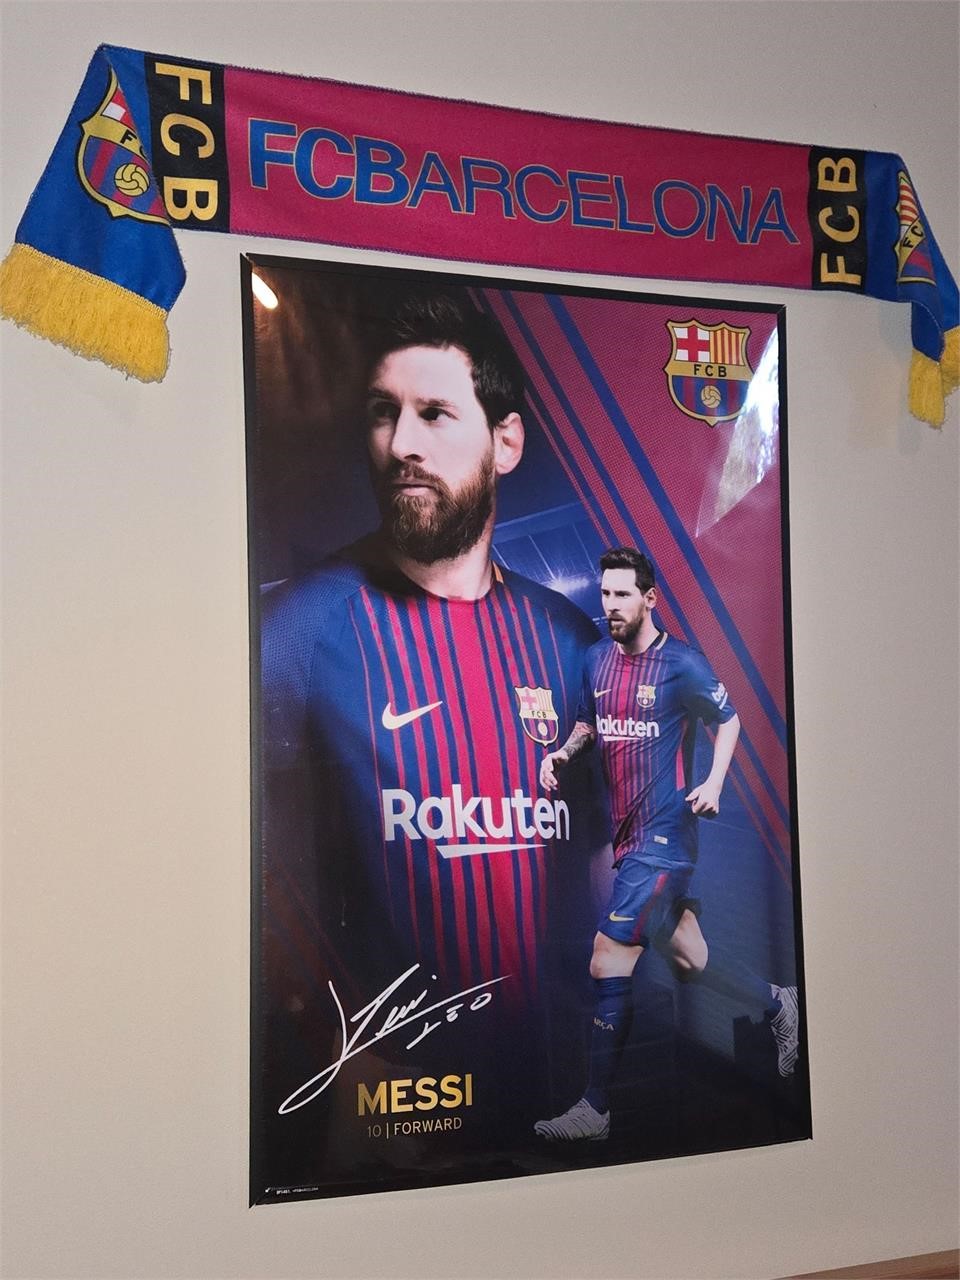 Messi Soccer poster and FCB Barcelona scarf